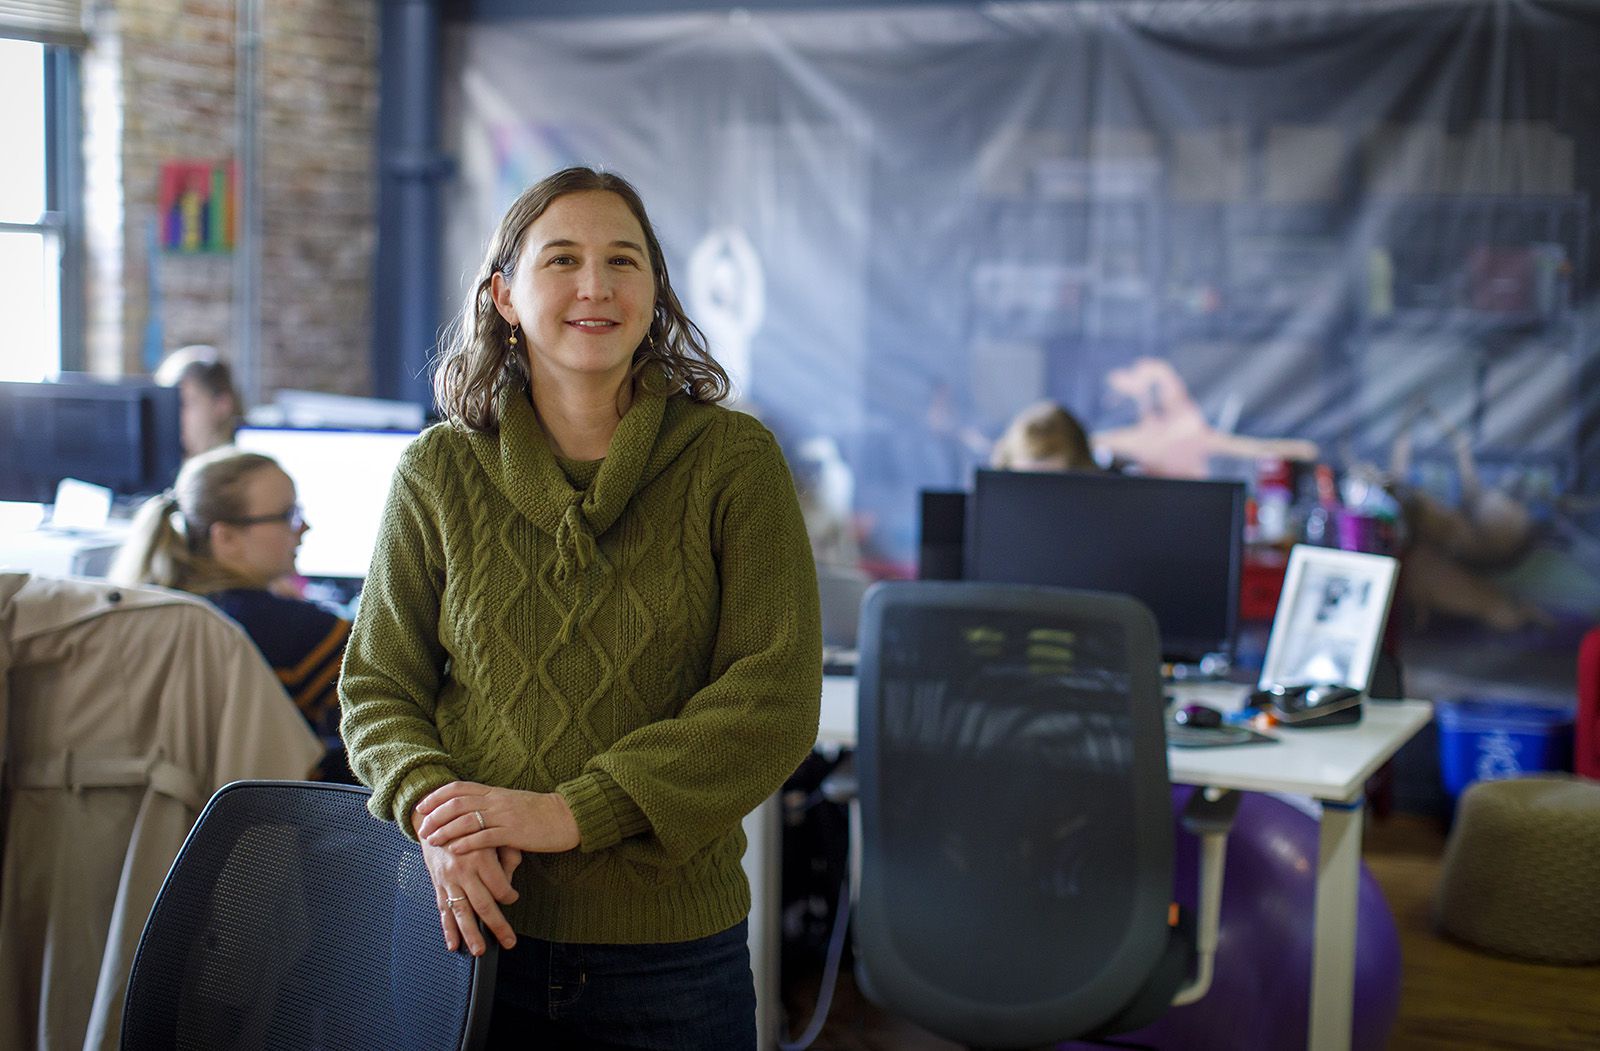 Chicago-based Jellyvision, which designs benefits enrollment software, has a "graceful leaving" policy that encourages employees to inform the company of their intent to leave. Lesley Tweedie, senior accounting coordinator at Jellyvision, took advantage of that policy. (Brian Cassella/Chicago Tribune/TNS)